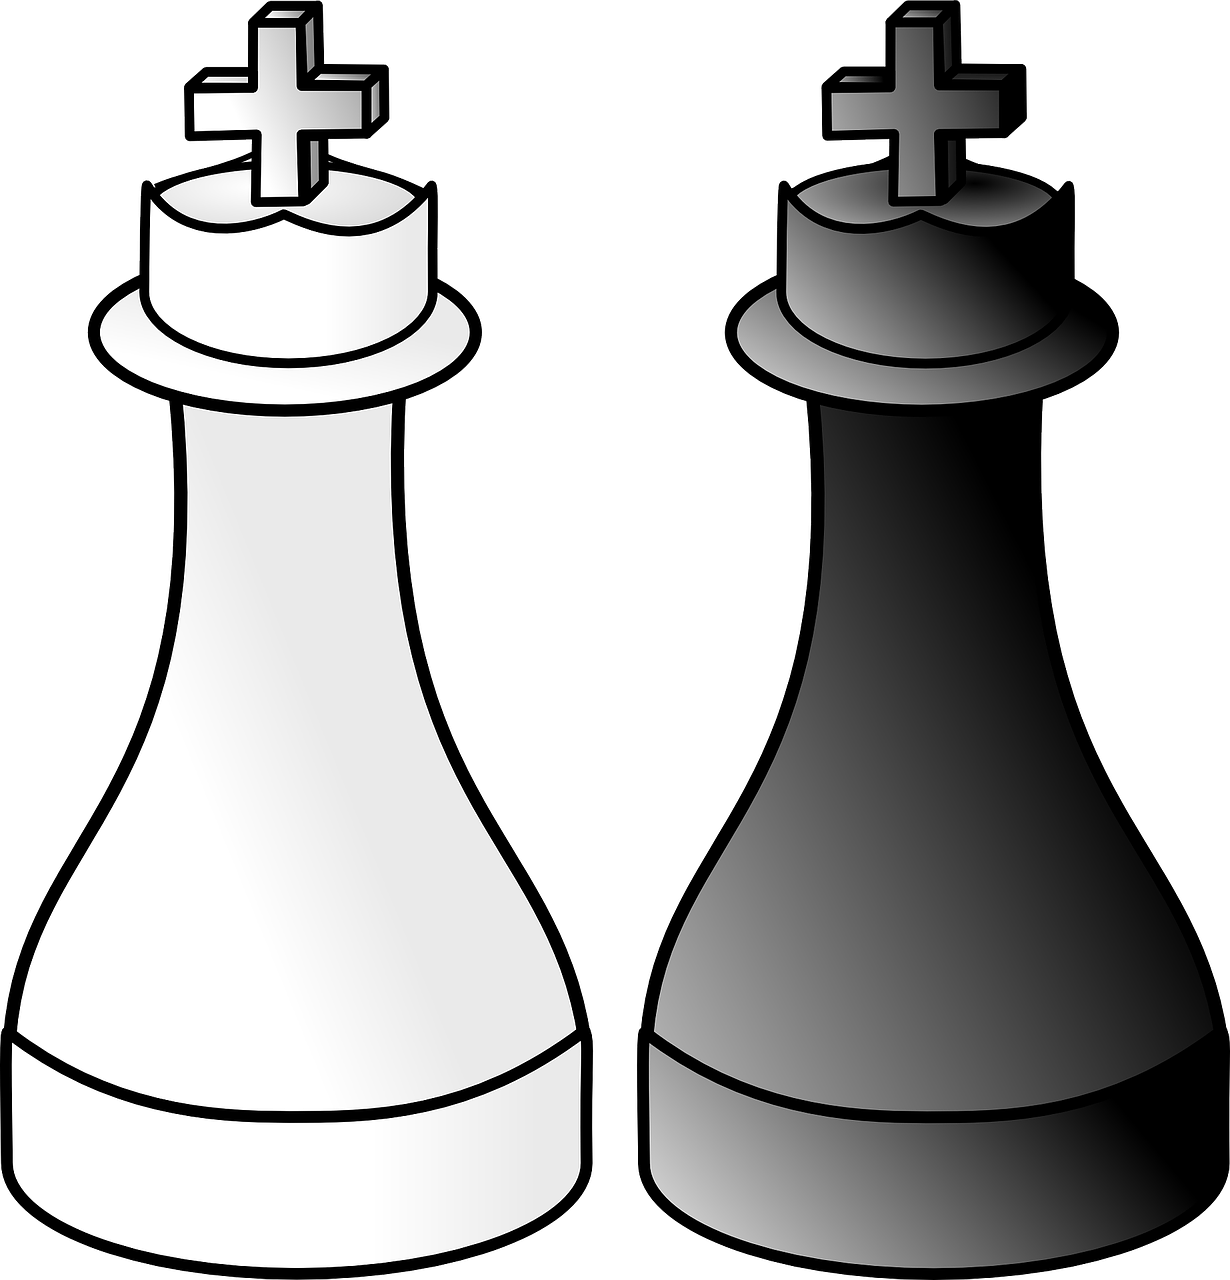 chess,kings,king,black,white,pieces,free vector graphics,free pictures, free photos, free images, royalty free, free illustrations, public domain